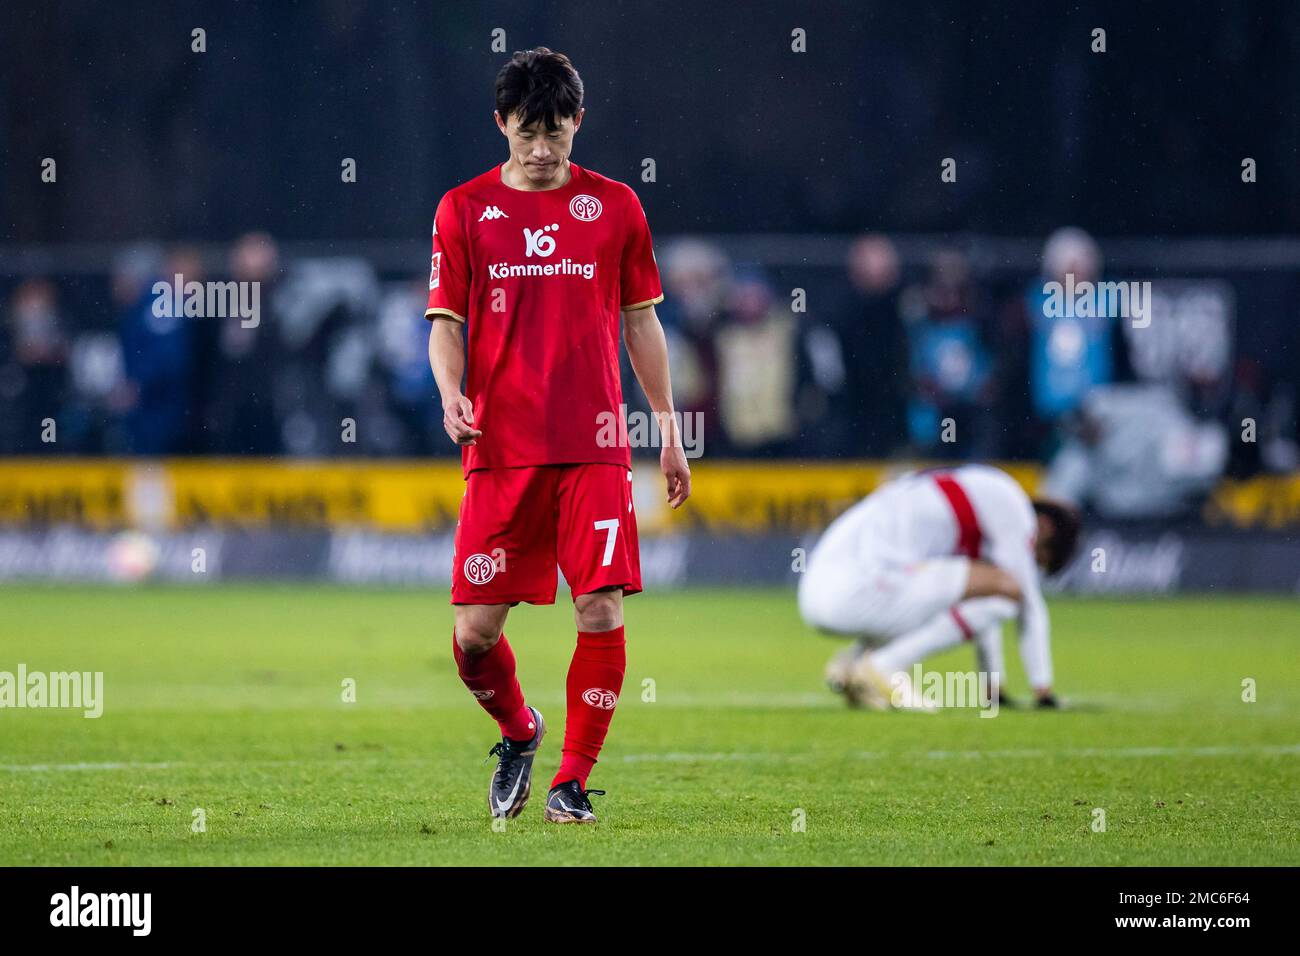 Stuttgart, Germany. 21st Jan, 2023. Soccer: Bundesliga, VfB Stuttgart - FSV Mainz 05, Matchday 16, Mercedes-Benz Arena. Mainz's Jae-sung Lee reacts unhappily. Credit: Tom Weller/dpa - IMPORTANT NOTE: In accordance with the requirements of the DFL Deutsche Fußball Liga and the DFB Deutscher Fußball-Bund, it is prohibited to use or have used photographs taken in the stadium and/or of the match in the form of sequence pictures and/or video-like photo series./dpa/Alamy Live News Stock Photo